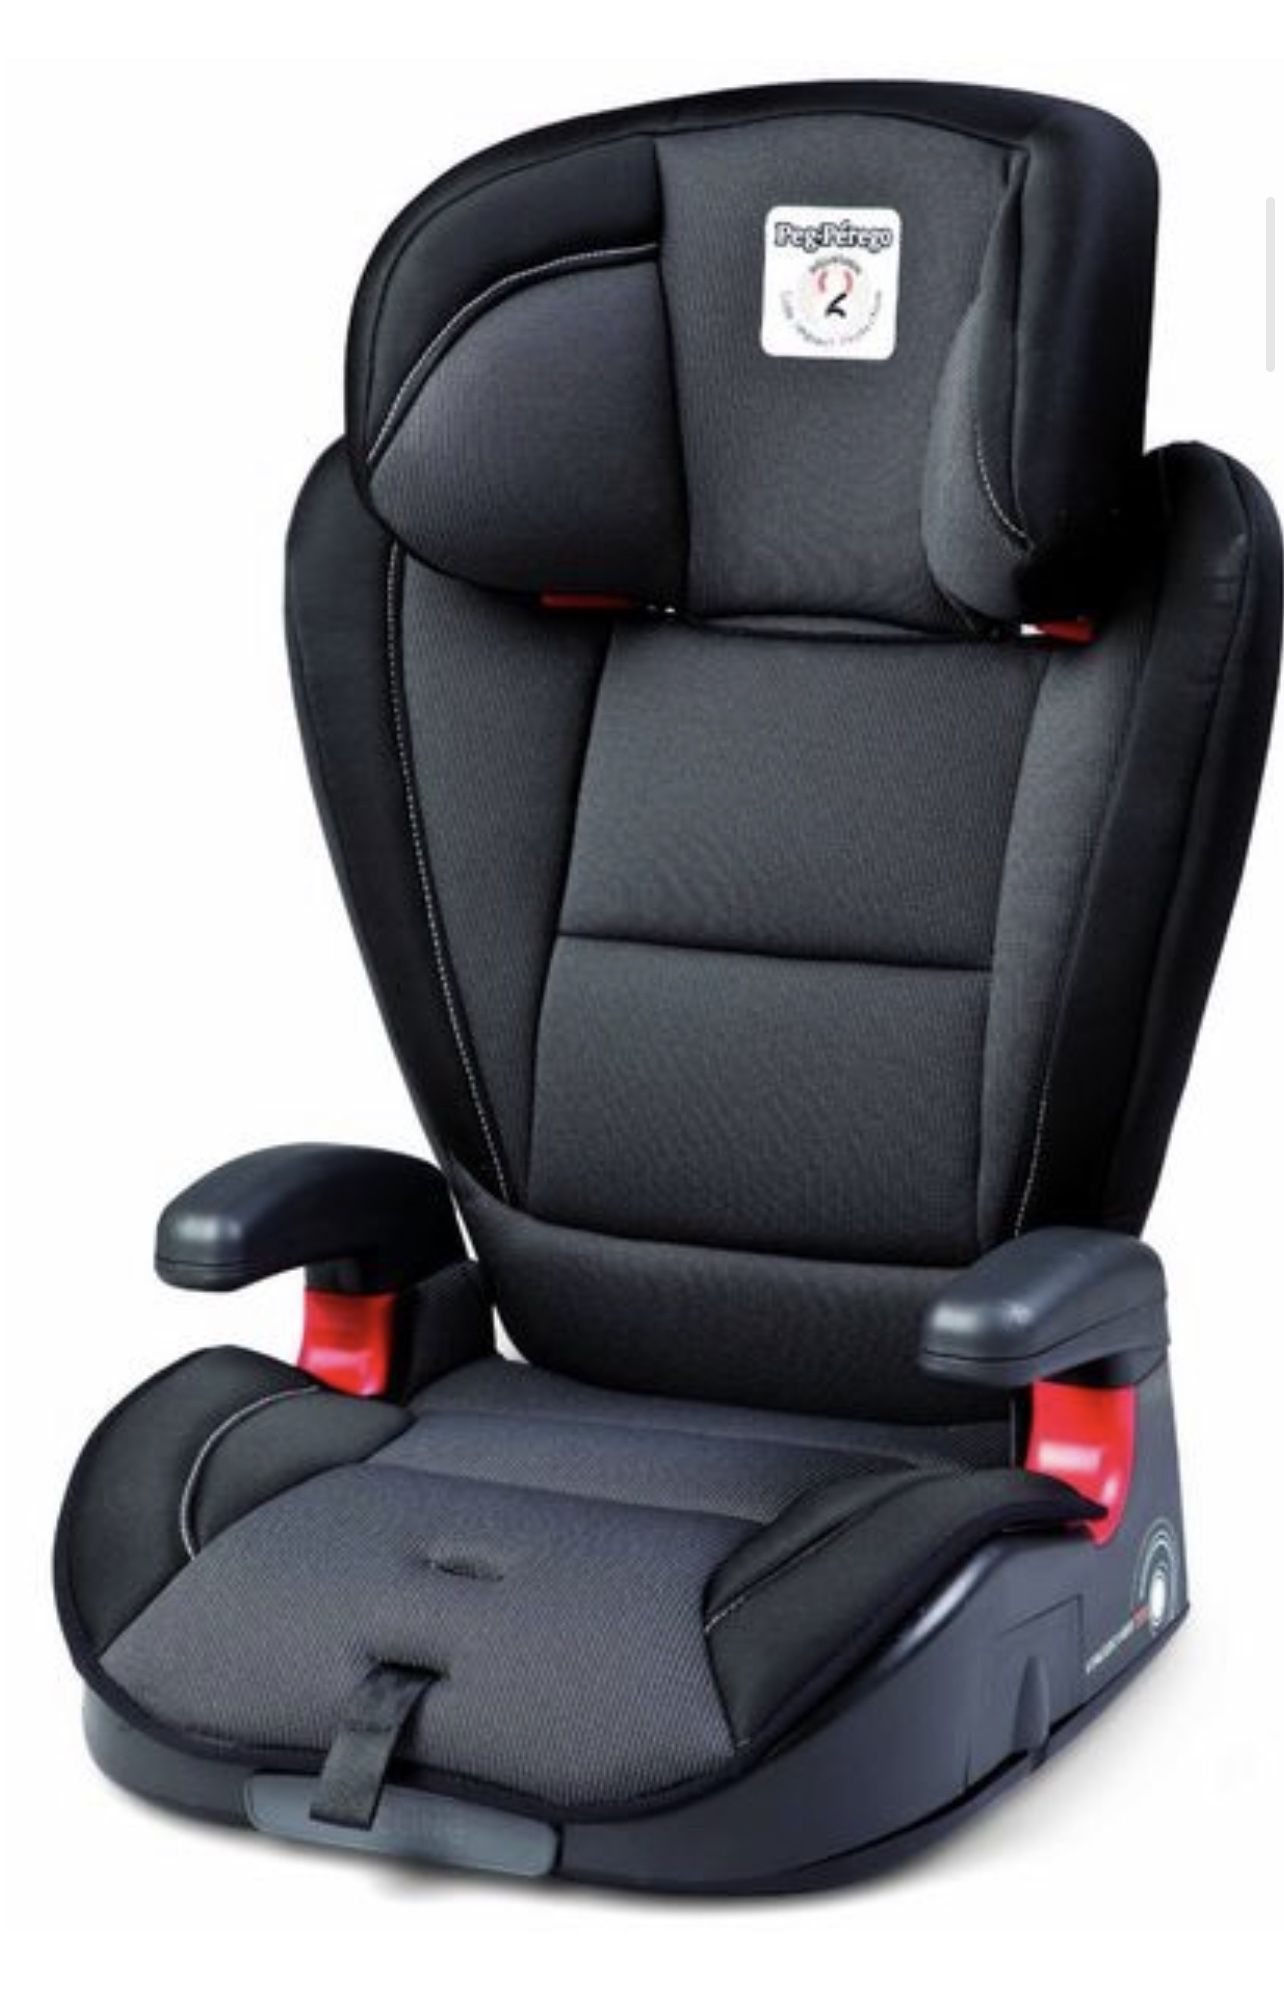 Peg Perego High Back Booster Car Seat $100